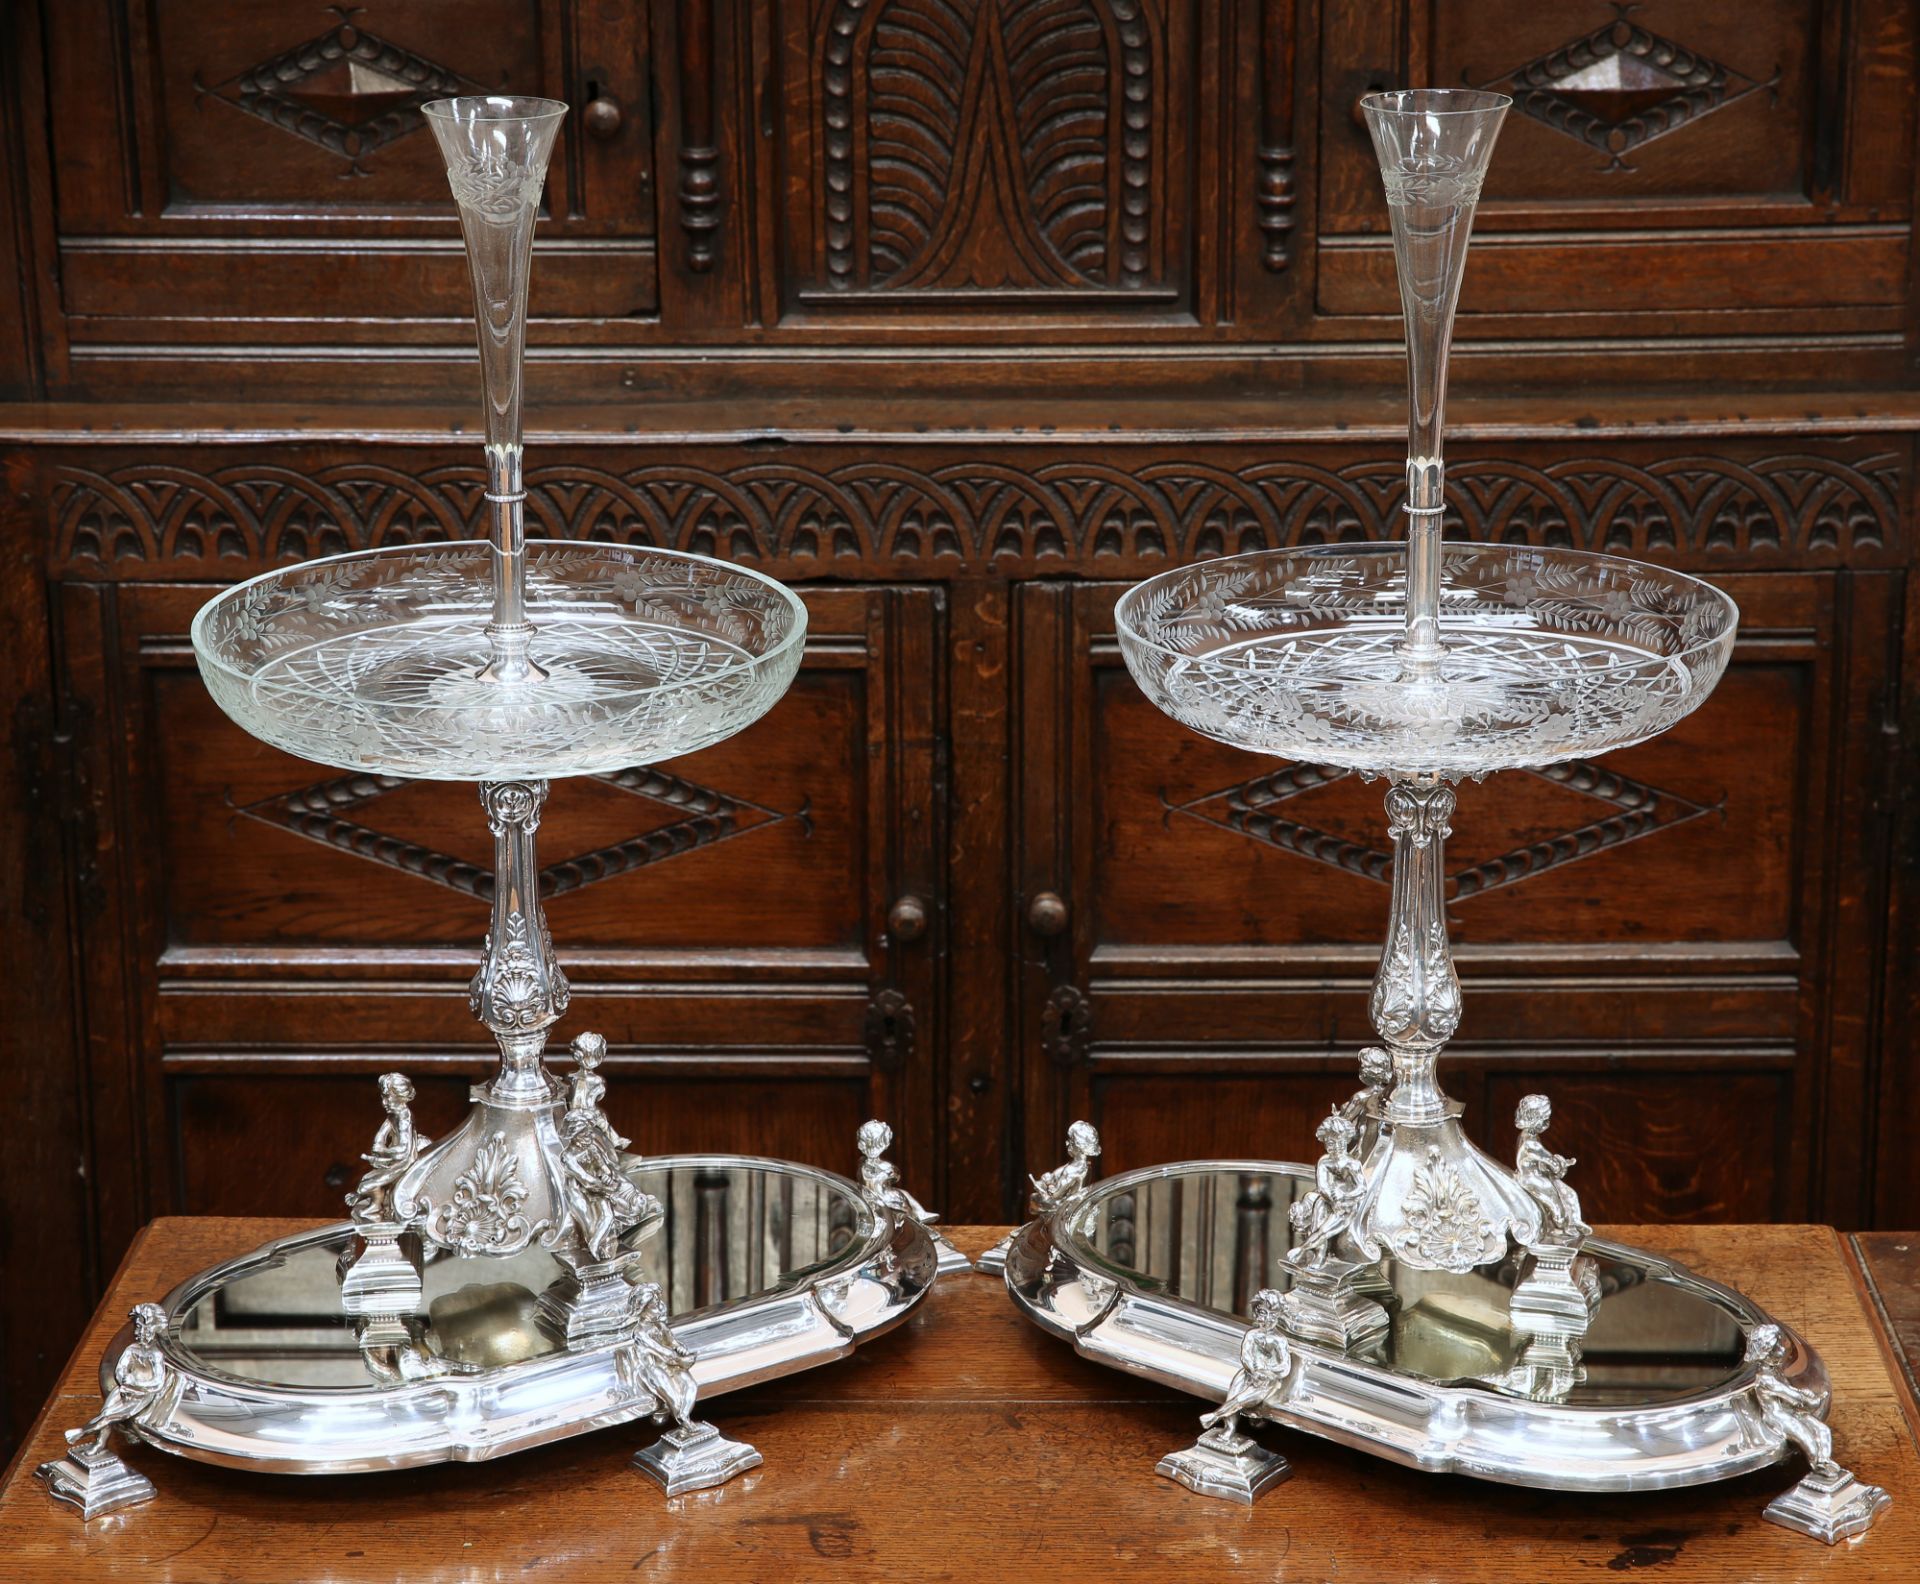 A HANDSOME PAIR OF 19TH CENTURY SILVER-PLATED CENTREPIECES - Image 2 of 7